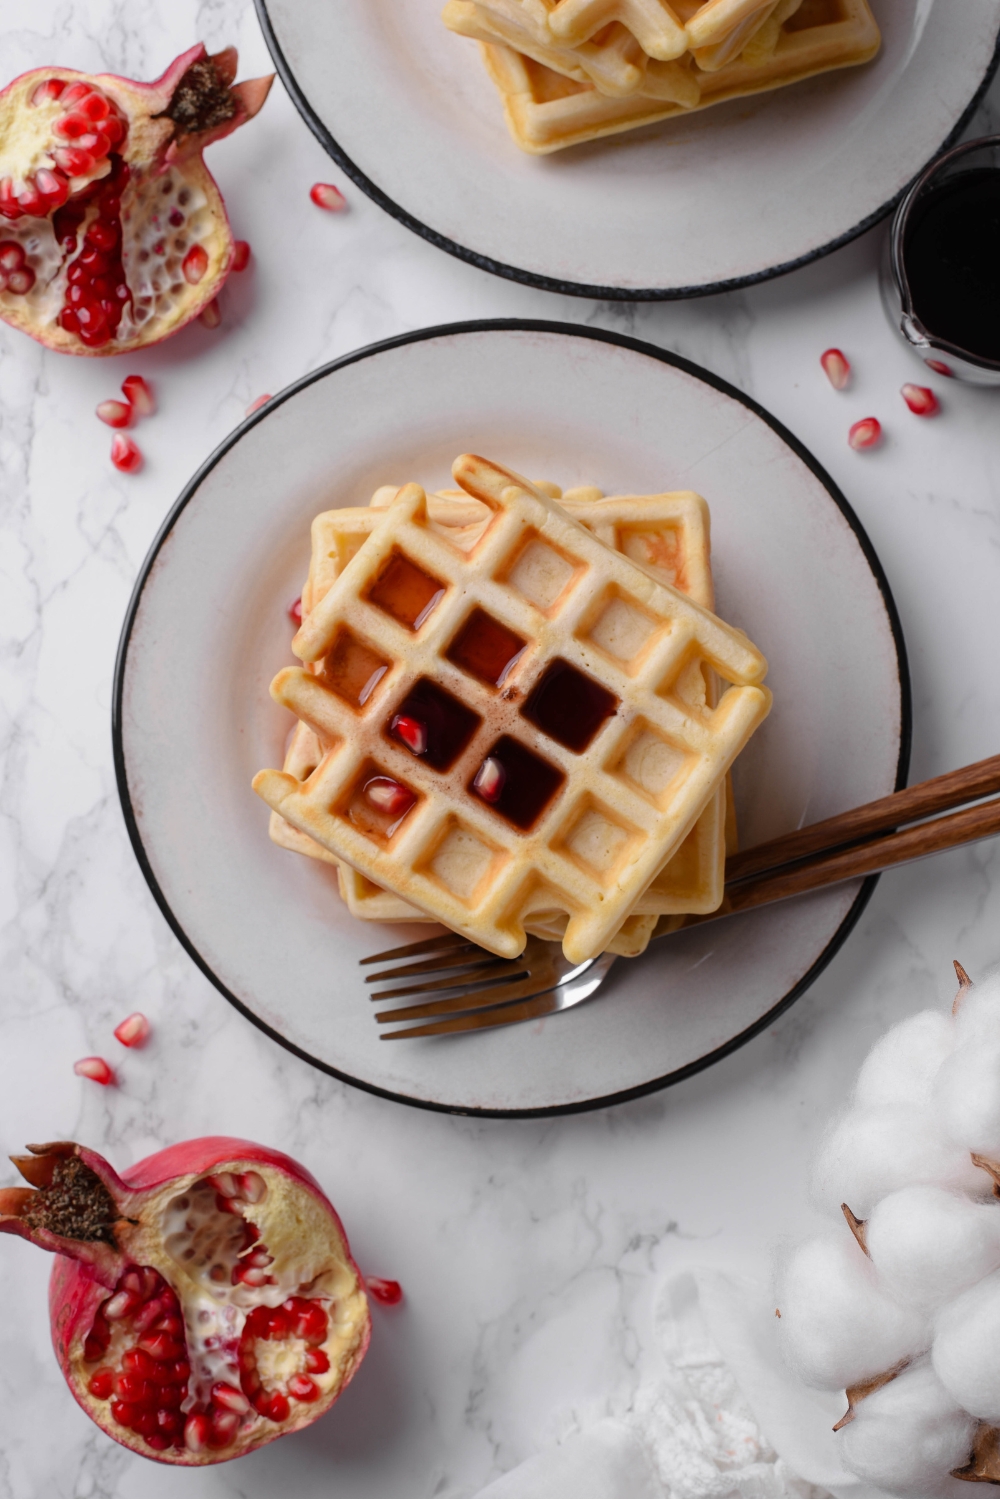 Overhead view of a plate of waffles stacked high covered in maple syrup with pomegranate seeds sprinkled on top and around the counter.